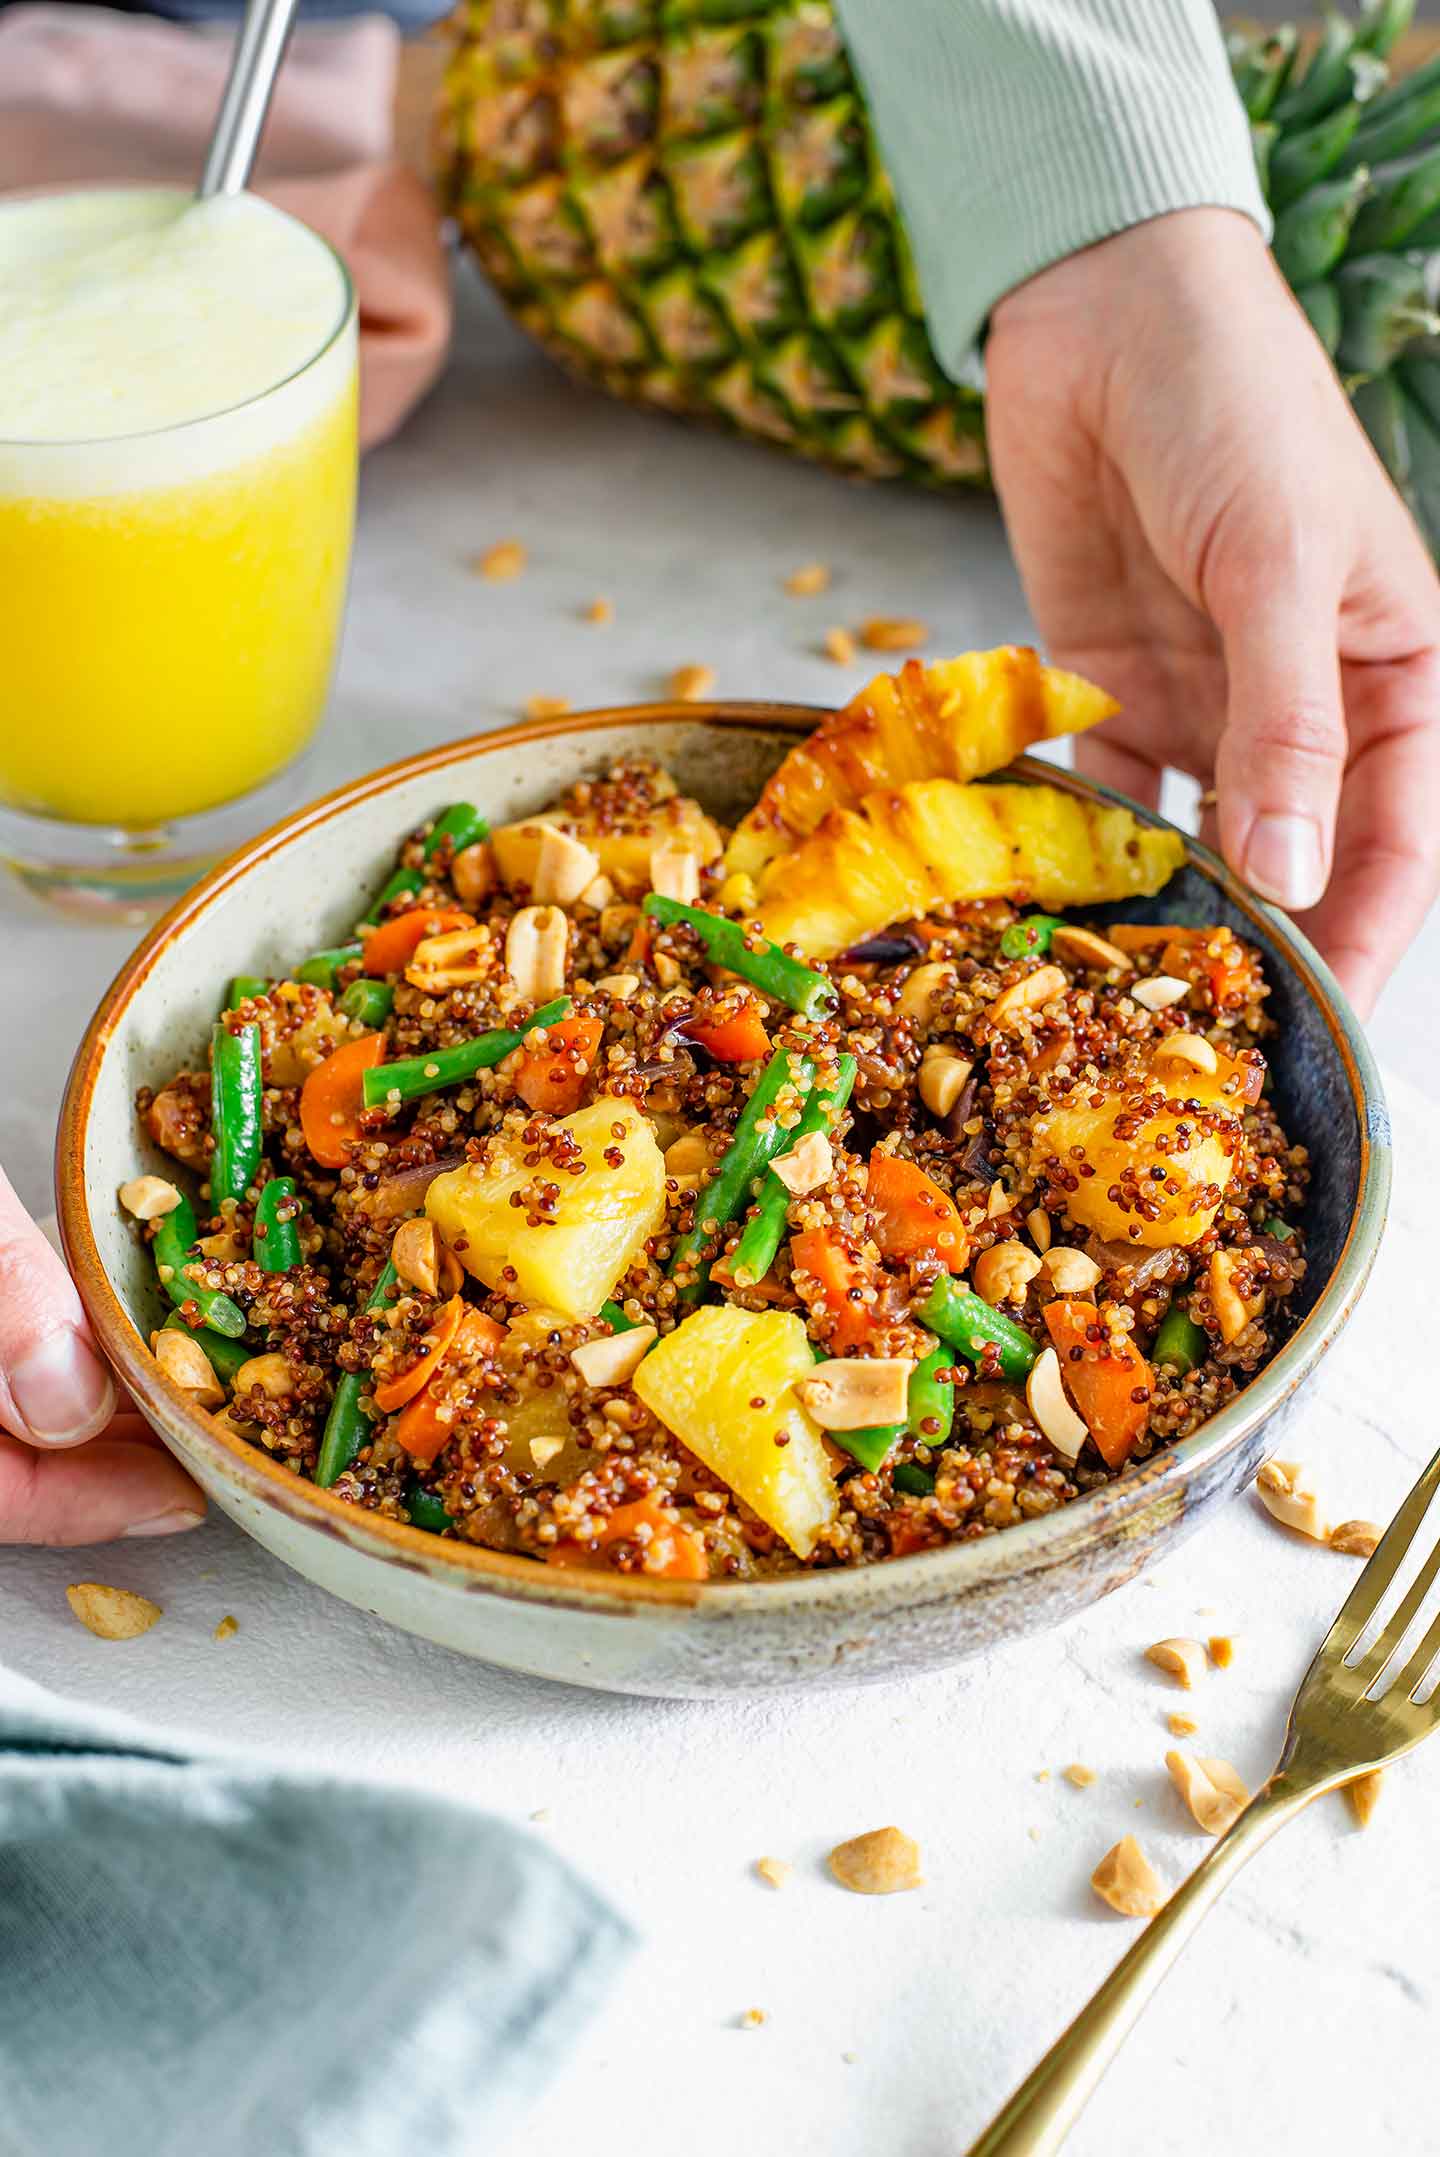 Side view of hands placing a shallow bowl of pineapple quinoa stir-fry on a white tray. Pieces of grilled and caramelized pineapple garnish the side of the dish.